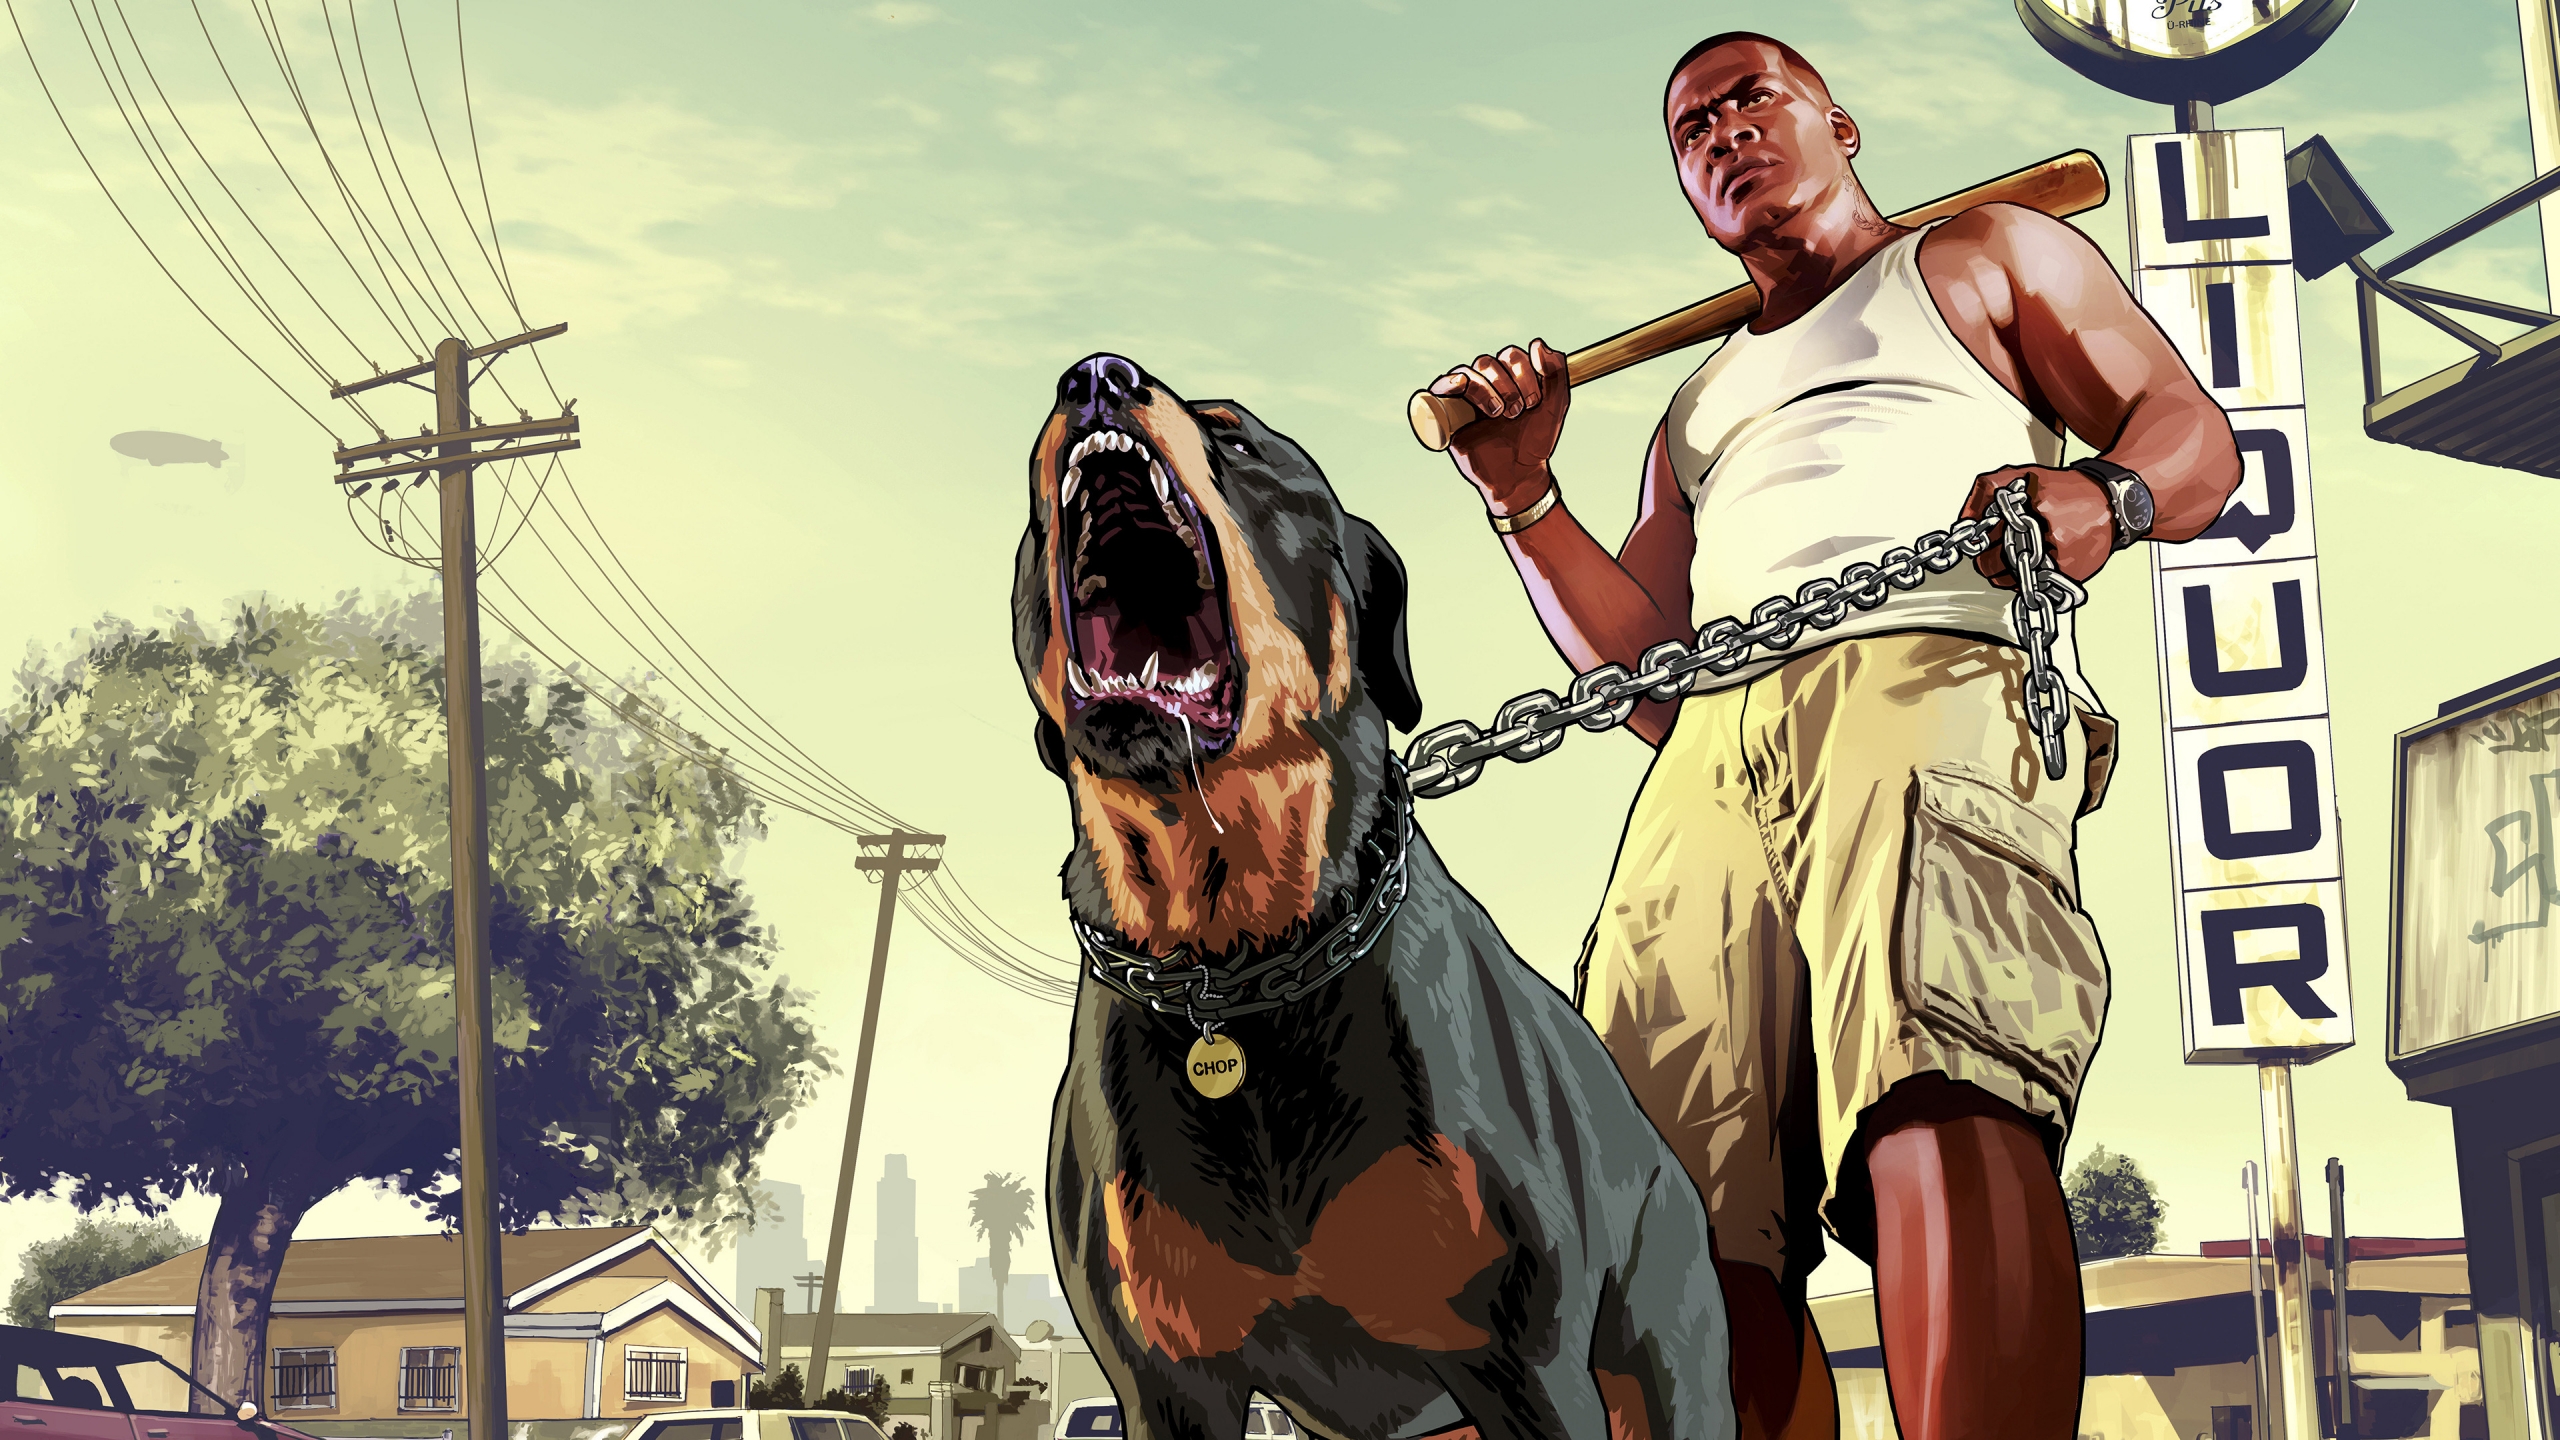 Franklin with his Dog GTA 5 for 2560x1440 HDTV resolution